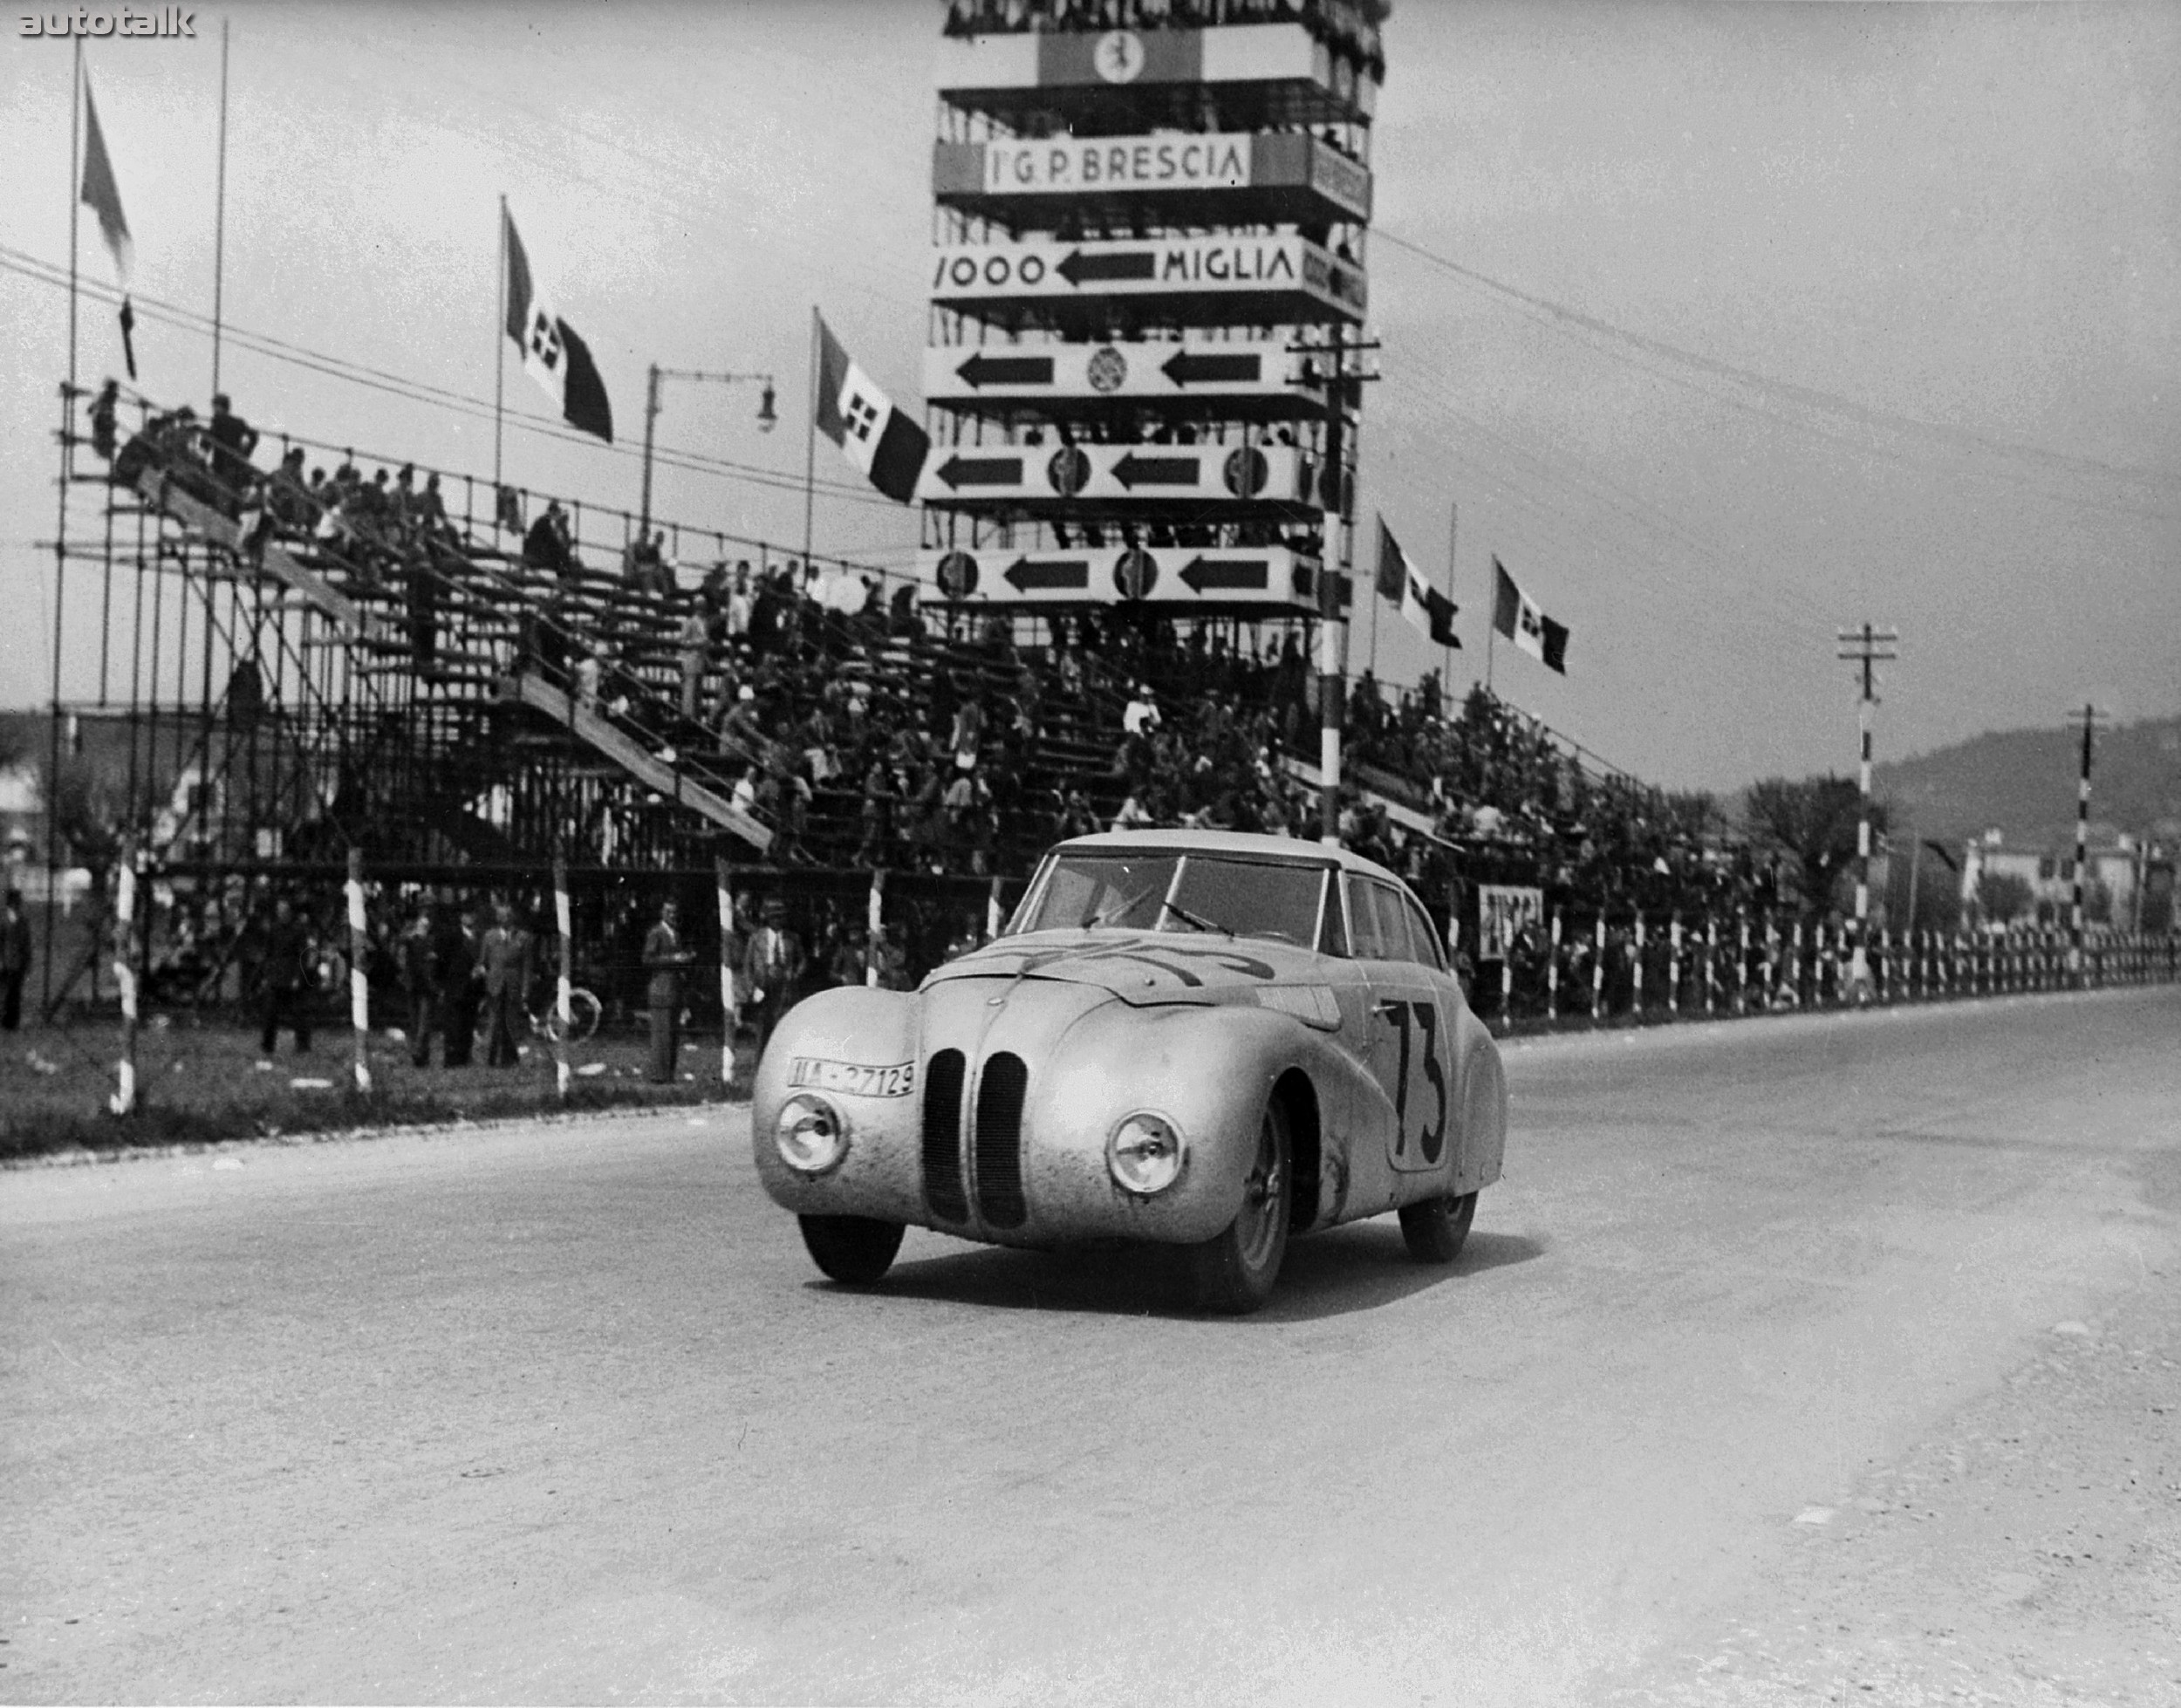 BMW 328 Kamm Coupé at Mille Miglia 1940